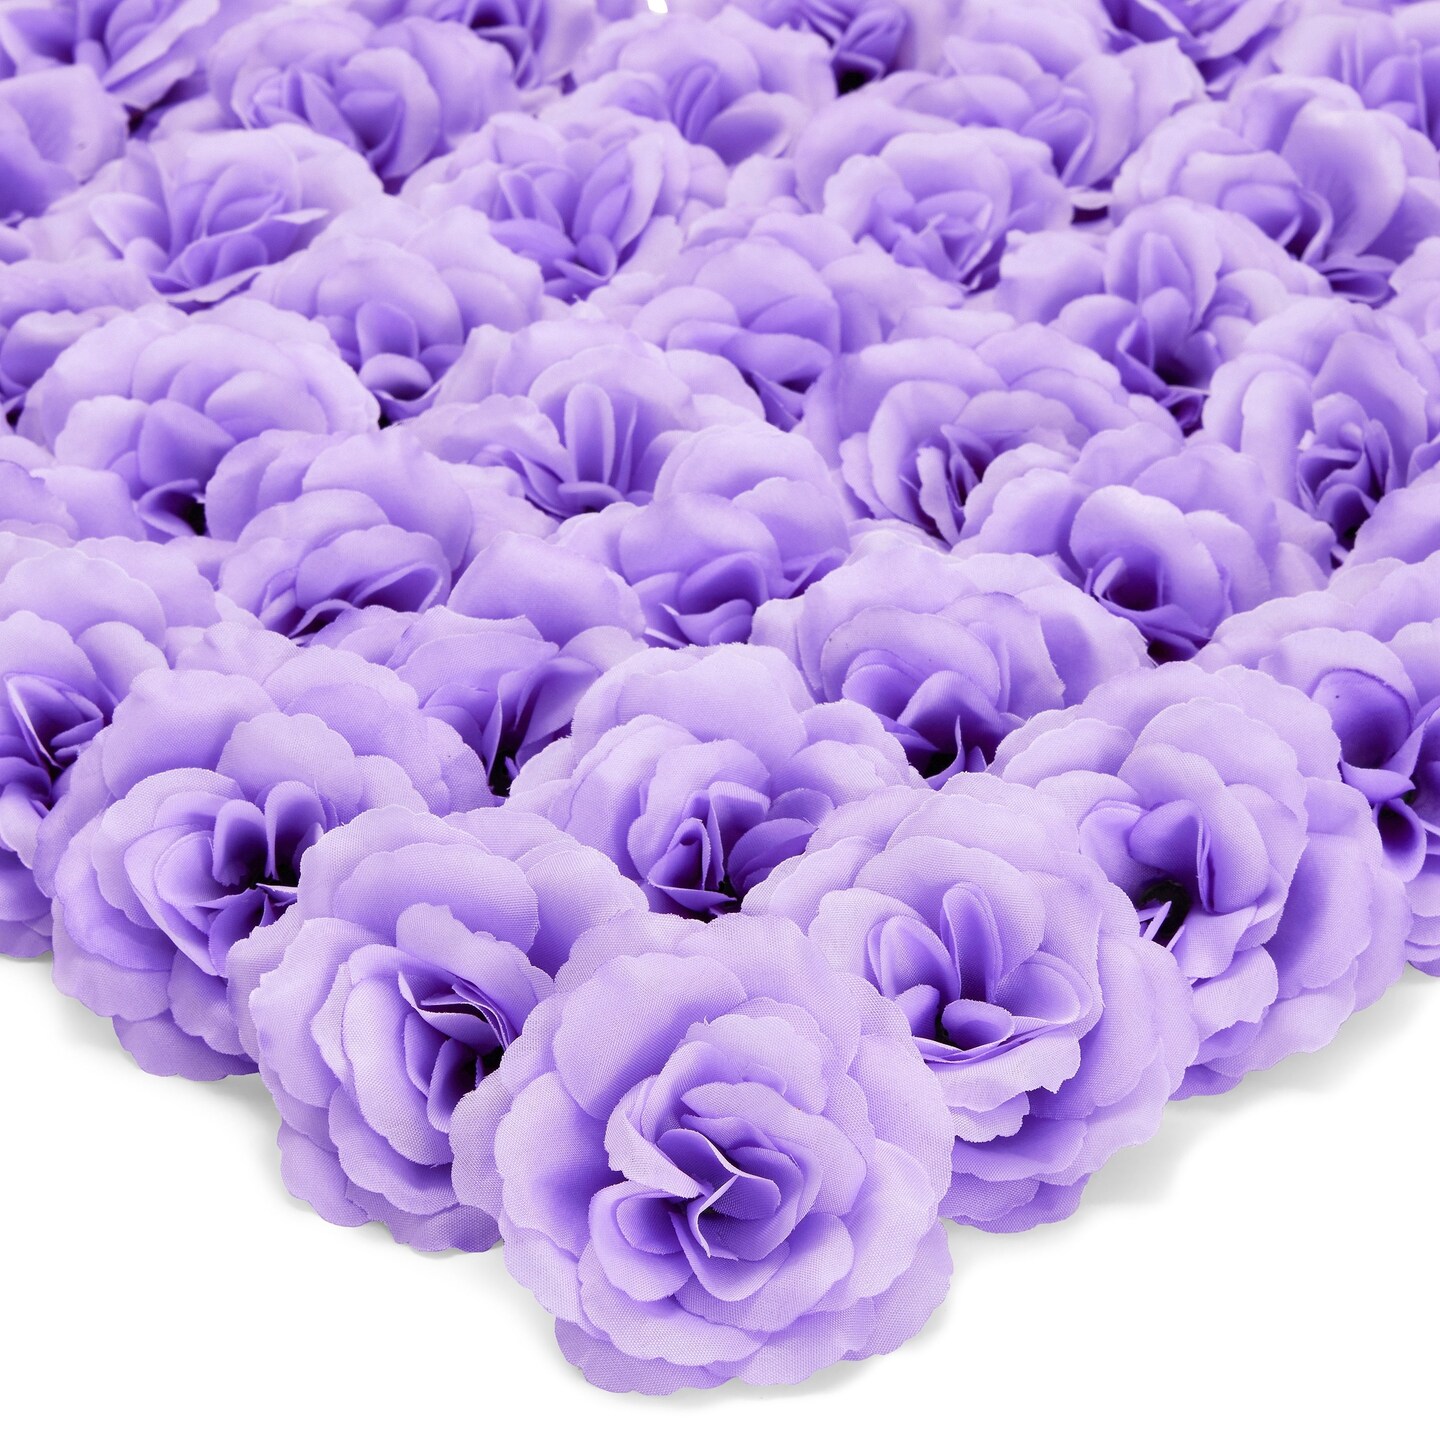 50 Pack Artificial Light Purple Roses for Valentine&#x27;s Decorations, DIY Crafts, 3-Inch Stemless Flower Heads for Wall Decor, Weddings, Bouquets